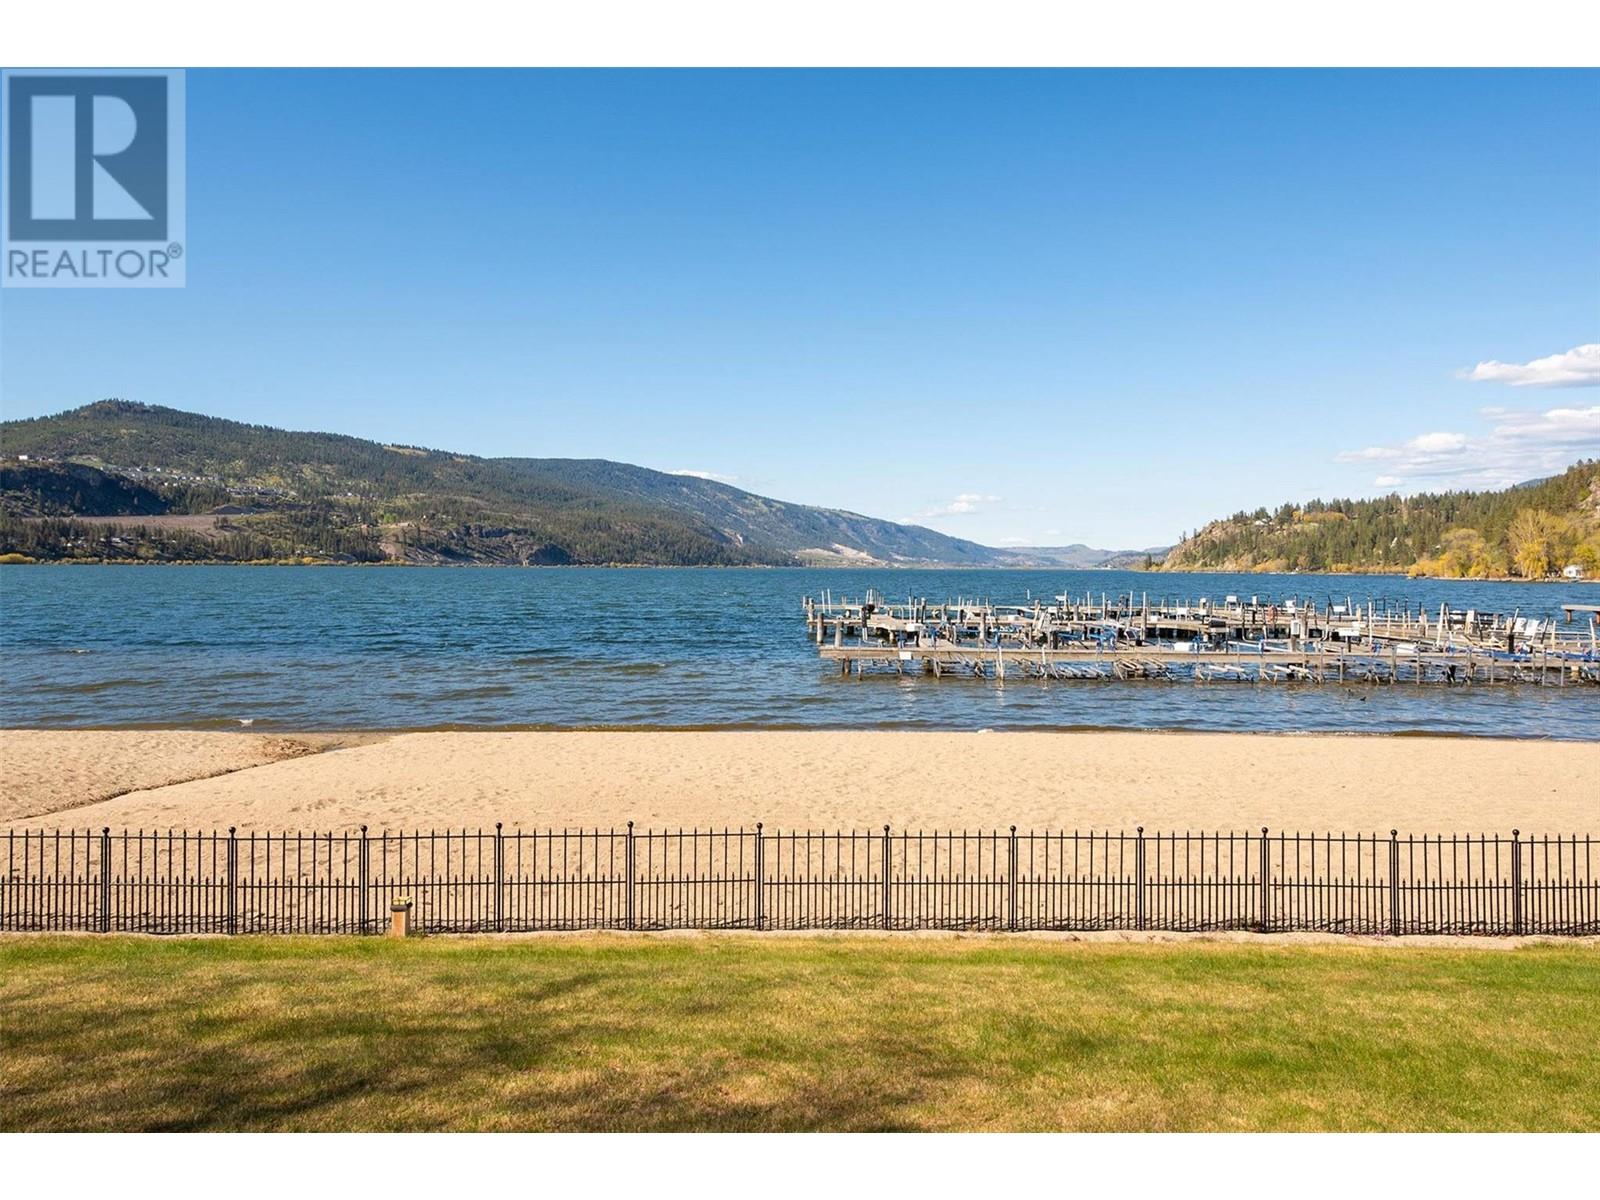 205 3570 Woodsdale Road, Lake Country